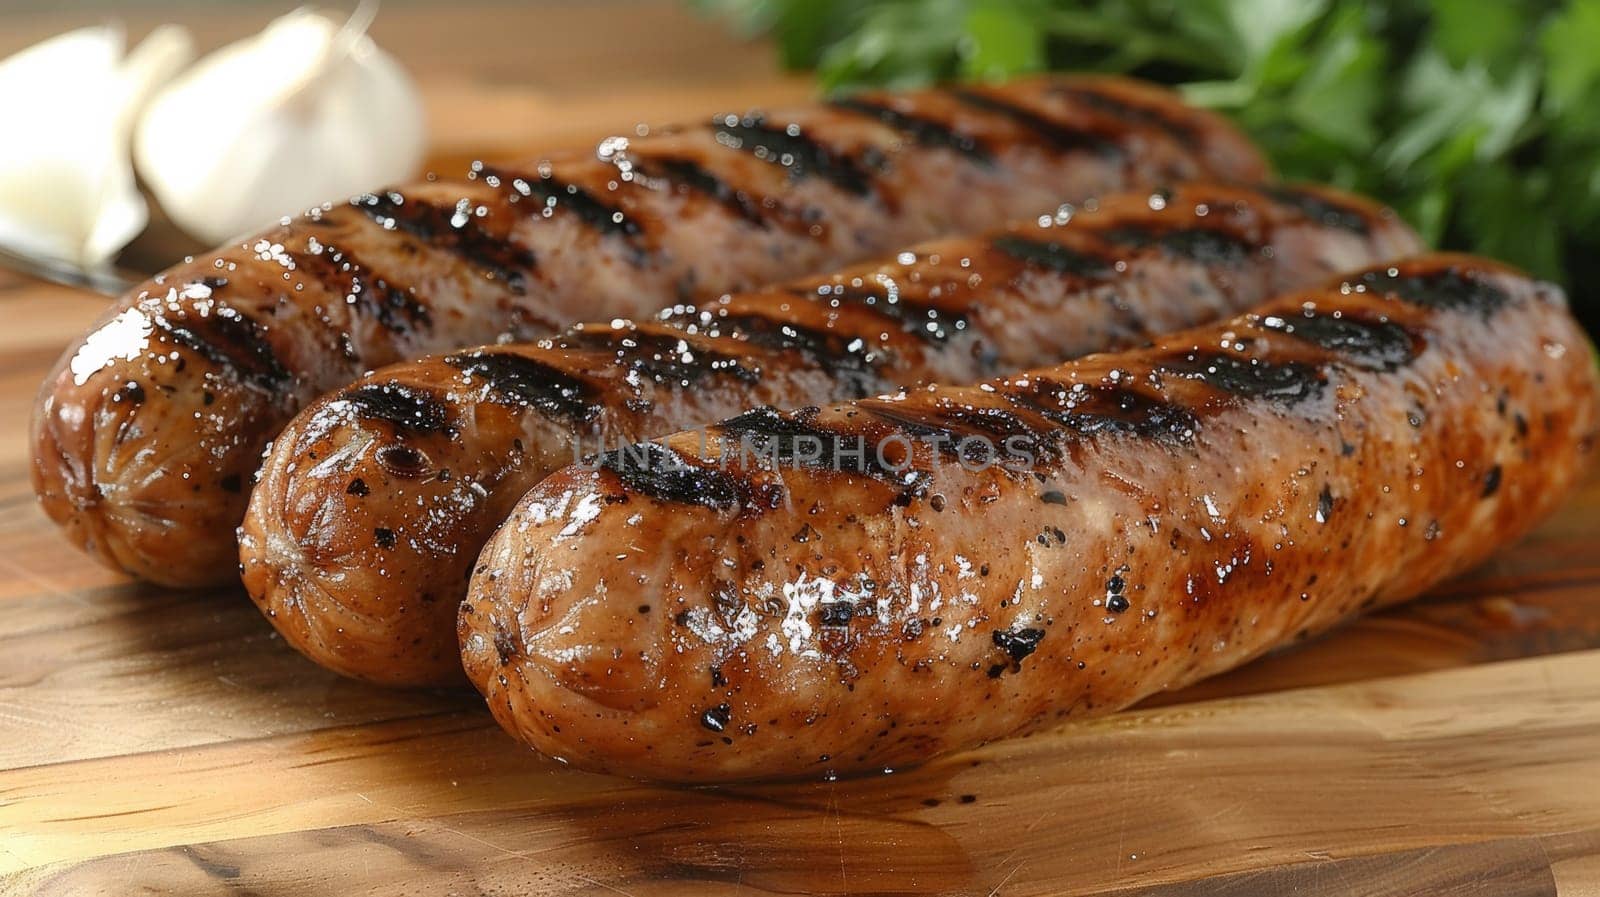 Three sausages are sitting on a cutting board with garlic, AI by starush